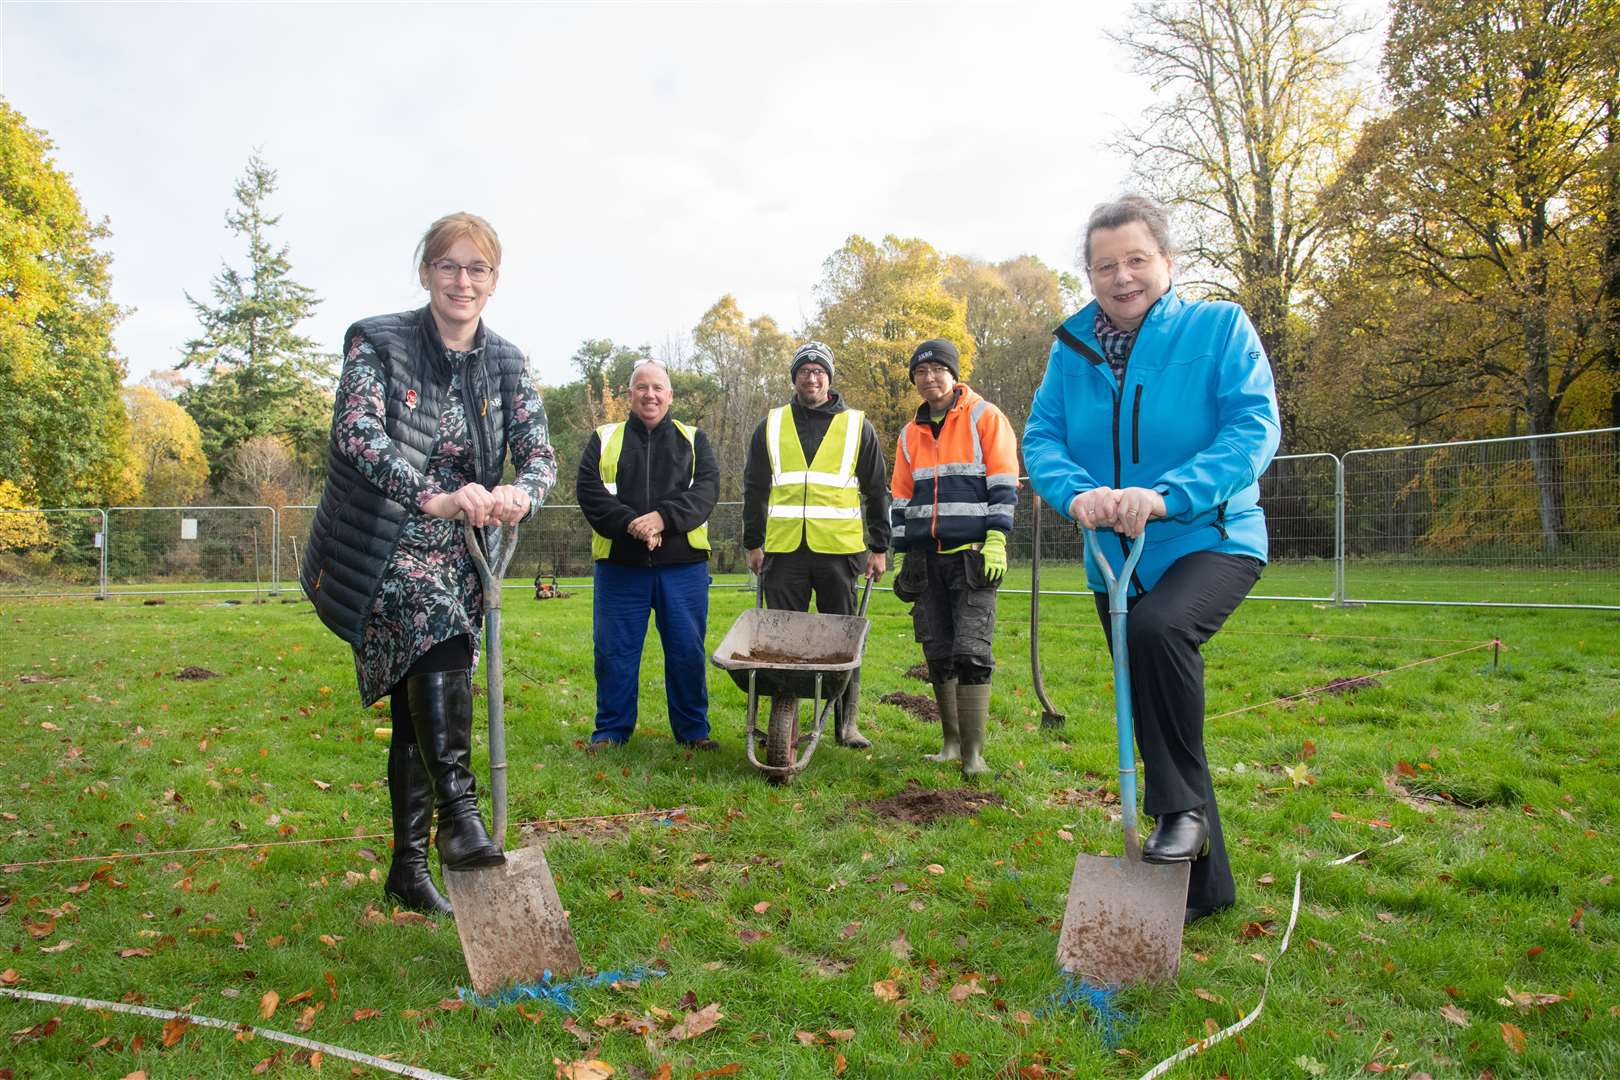 Fundraisers Kathleen Robertson (left) and Ann Rossiter (right) cut the turf...Work starts on the outdoor gym in Forres, which will be on a piece of land between Sandquhar Loch and Forres Academy. ..Picture: Daniel Forsyth..